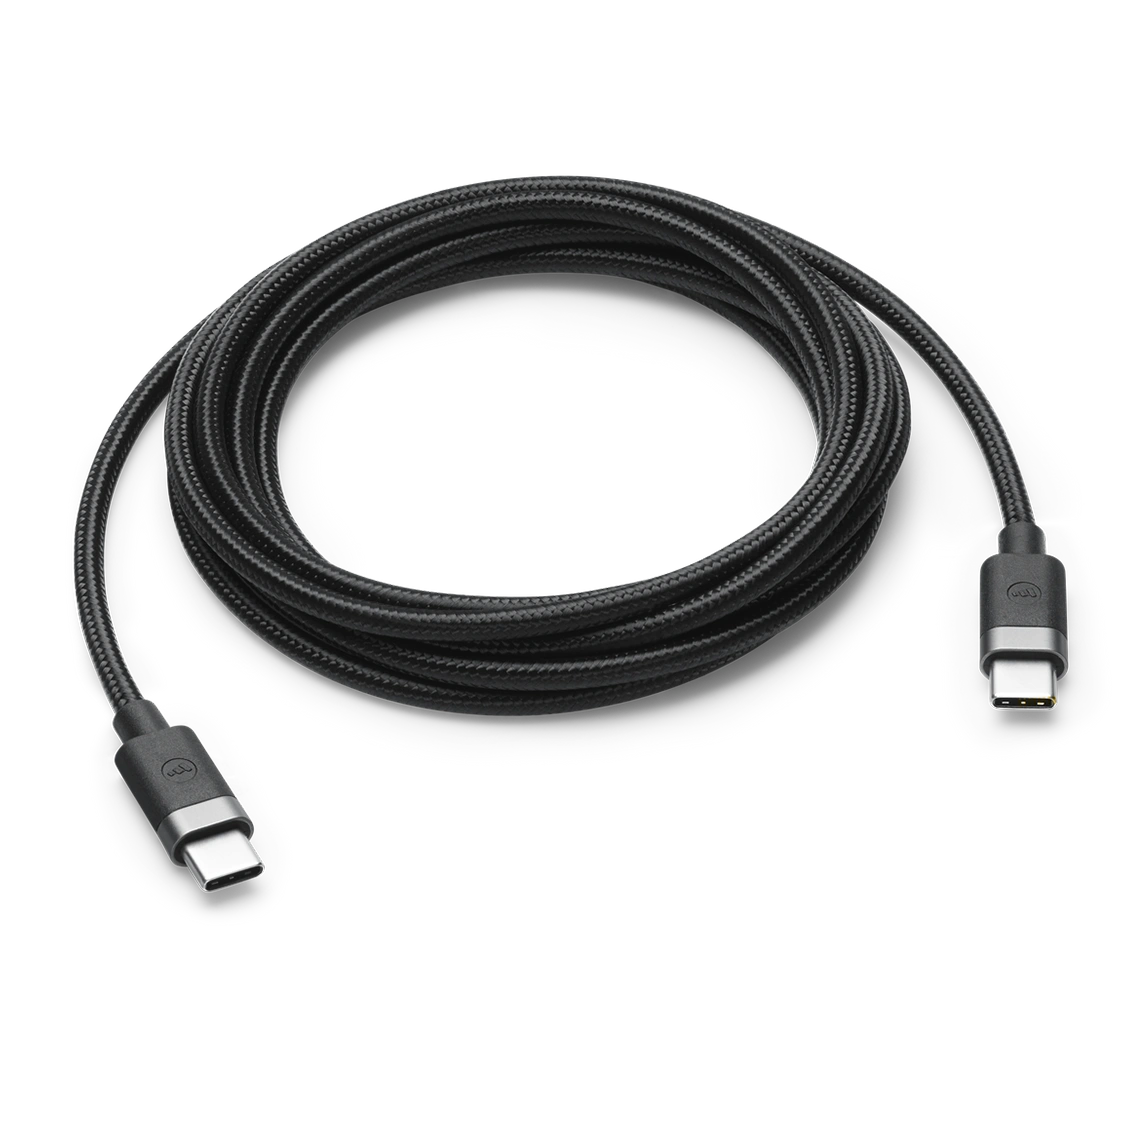 Mophie USB-C to USB-C Cable 1.5m